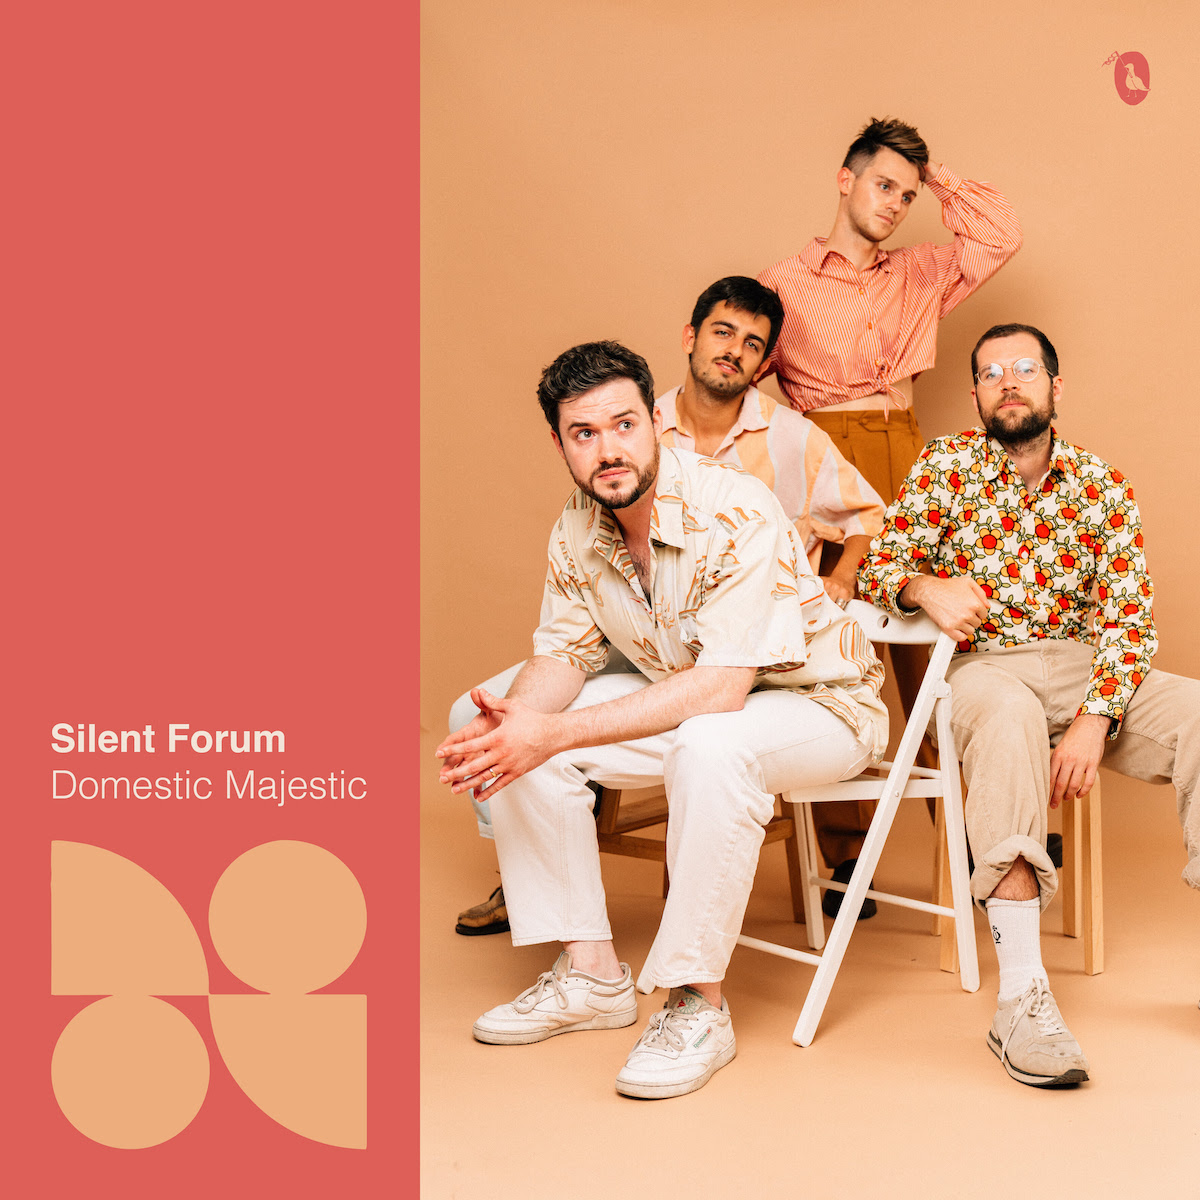 ALBUM REVIEW: Domestic Majestic by Silent Forum